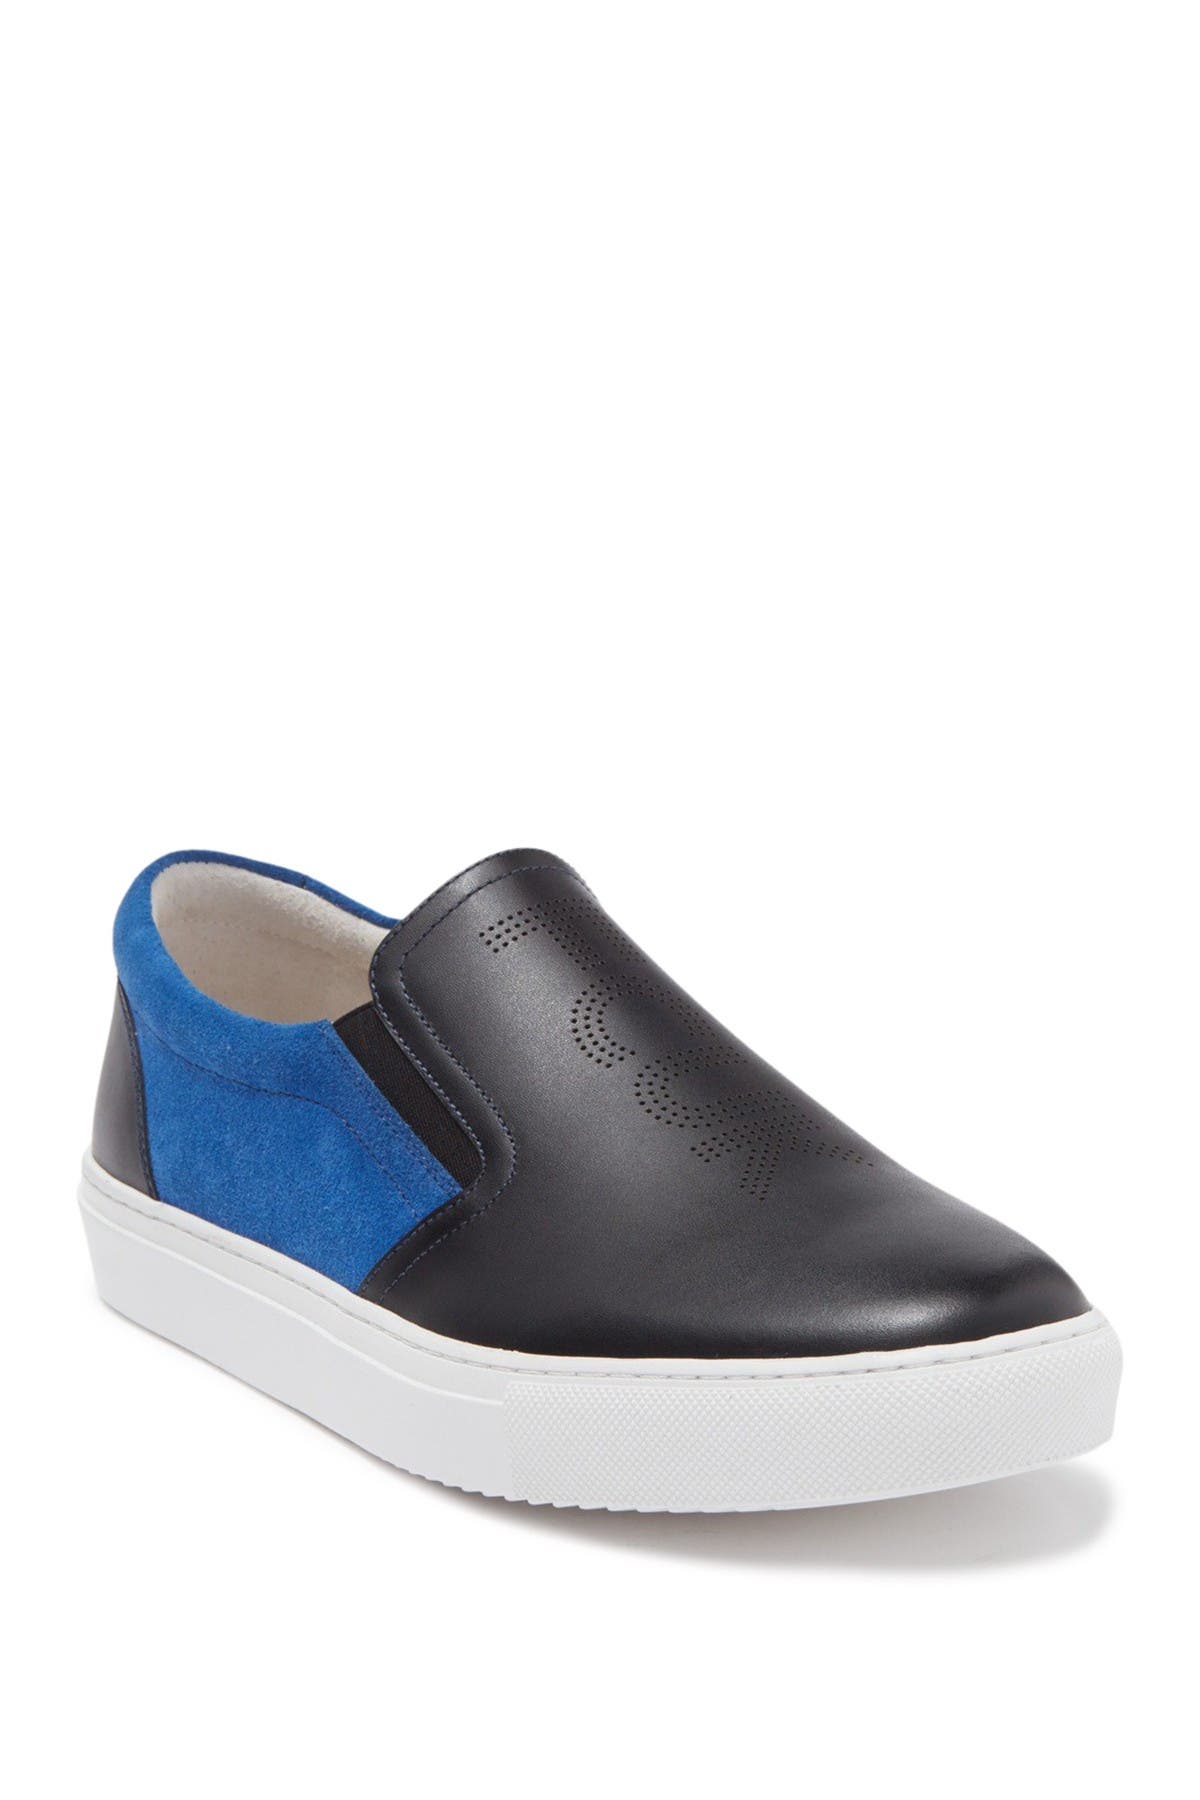 FRENCH CONNECTION MARCEL LEATHER COLORBLOCK SLIP-ON SNEAKER,190320355215